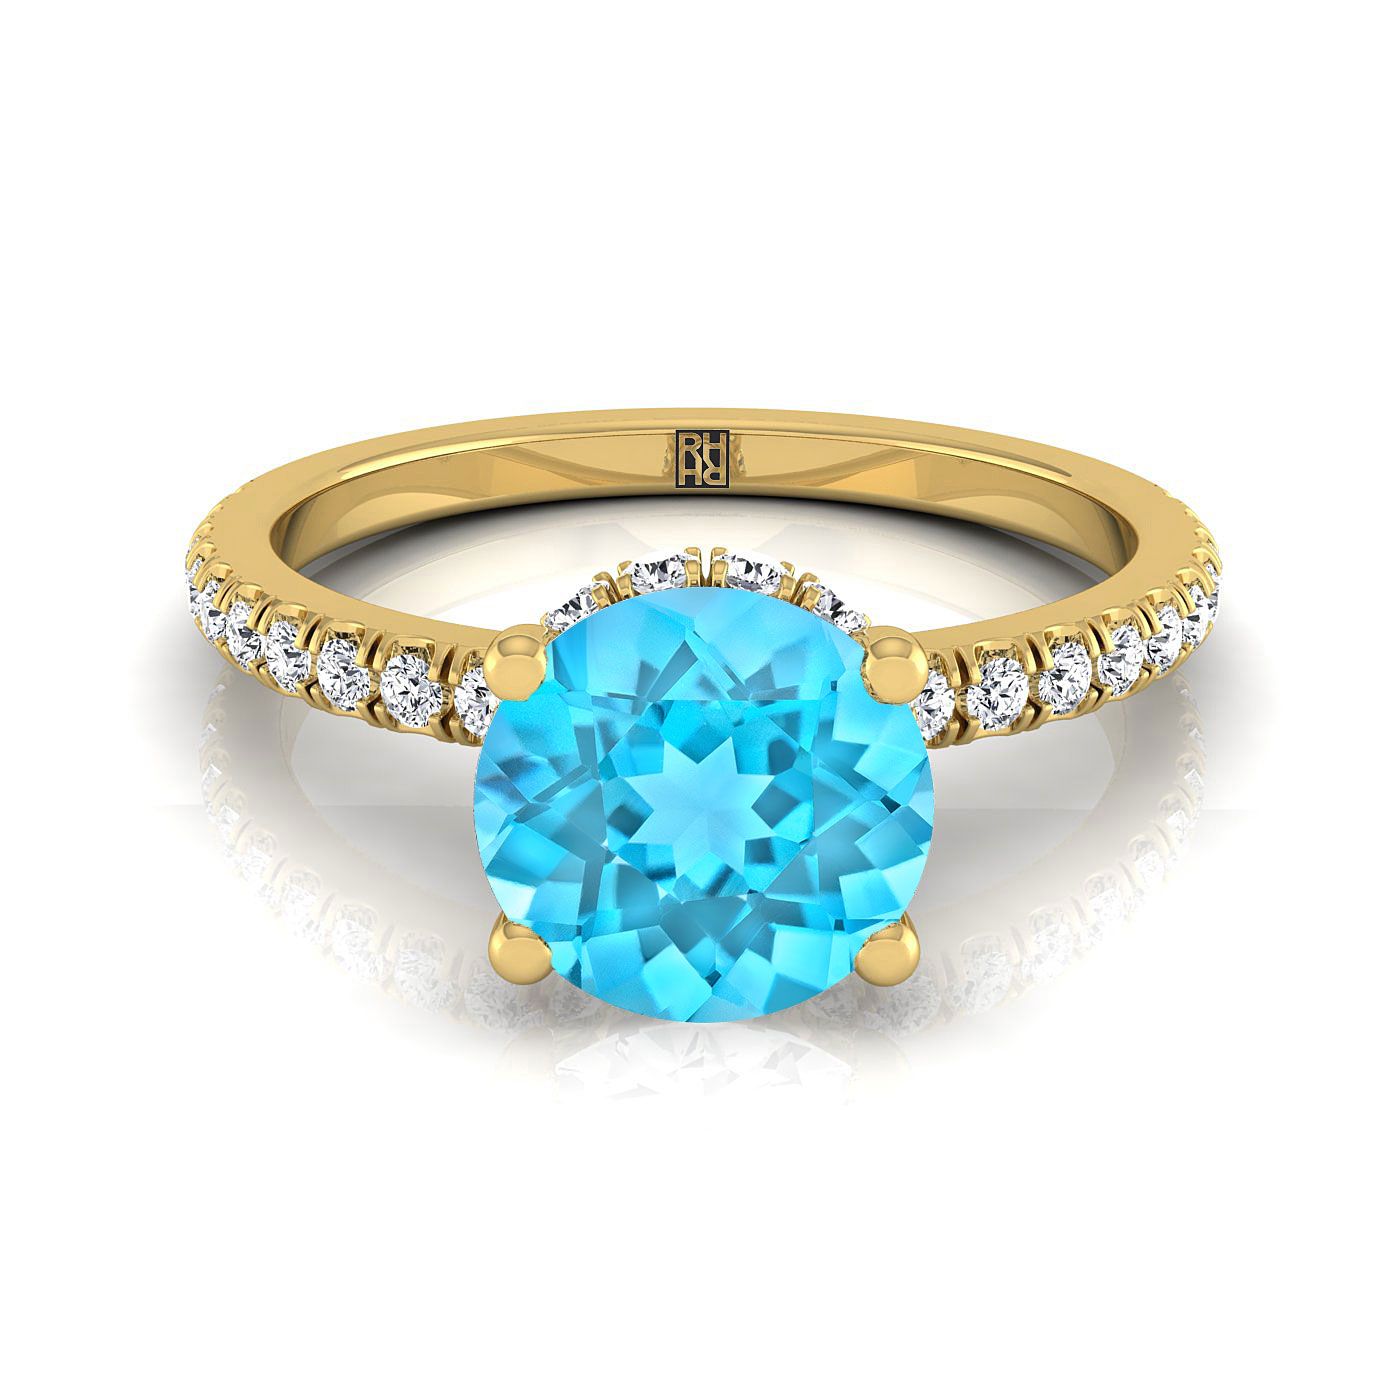 14K Yellow Gold Round Brilliant Swiss Blue Topaz Secret Diamond Halo French Pave Solitaire Engagement Ring -1/3ctw